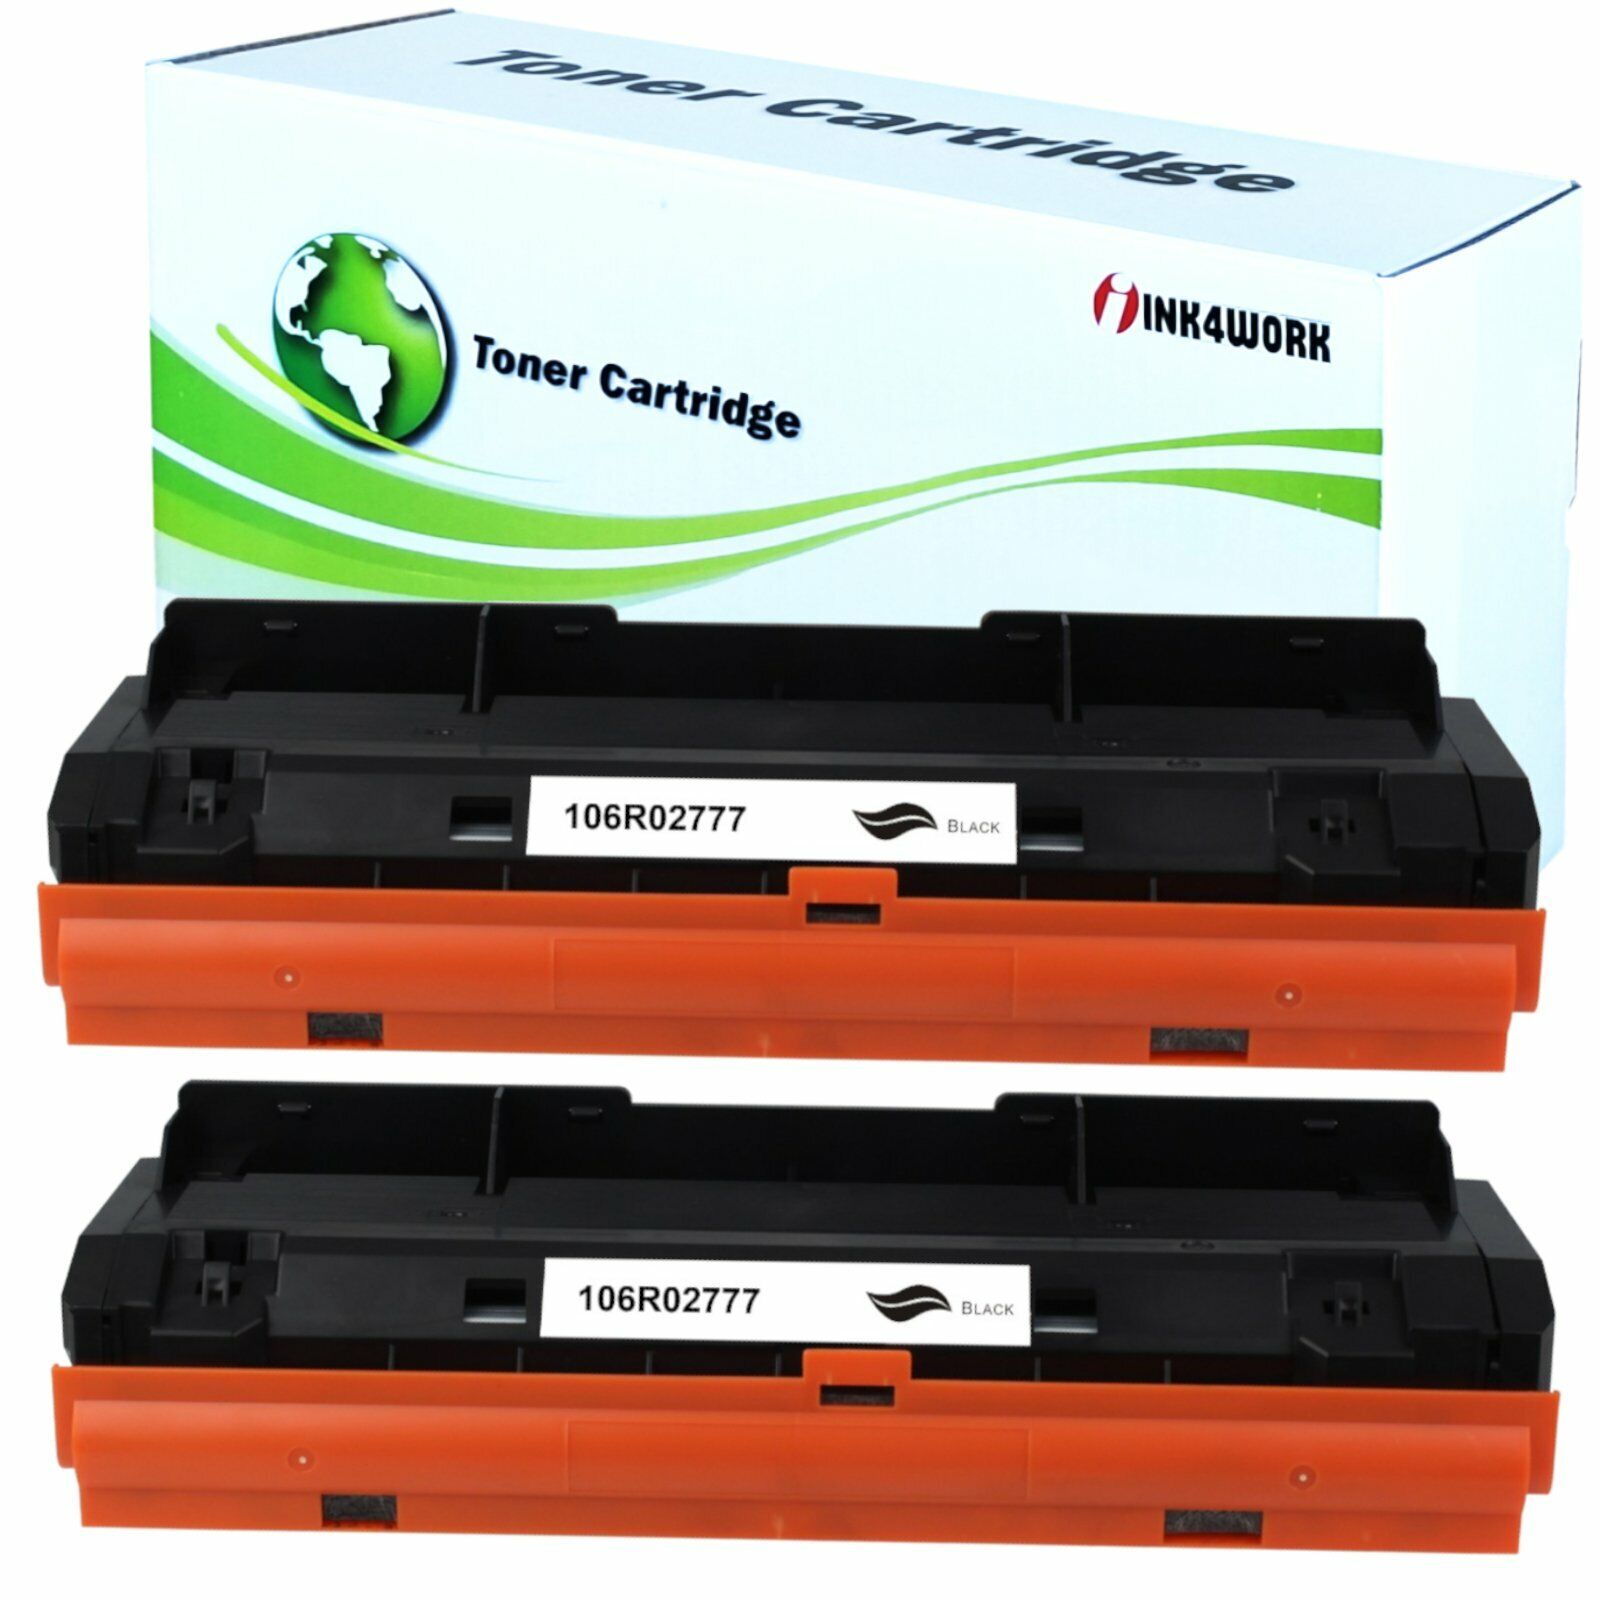 2 Pack 106R02777 Toner Cartridge For Xerox Phaser 3052 3260 WorkCentre 3215 3225